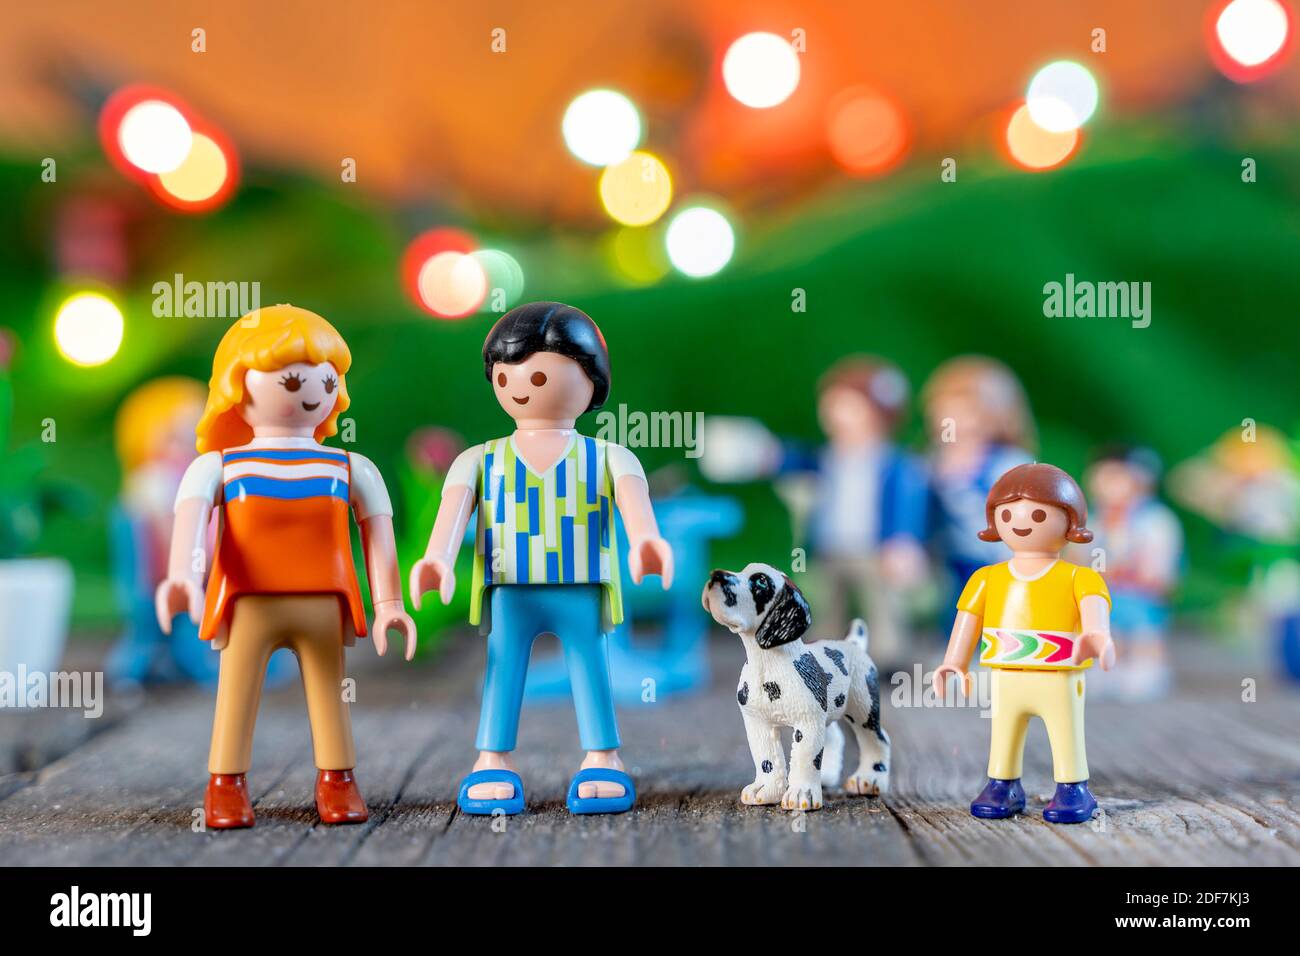 Playmobil Figurine High Resolution Stock Photography and Images - Alamy